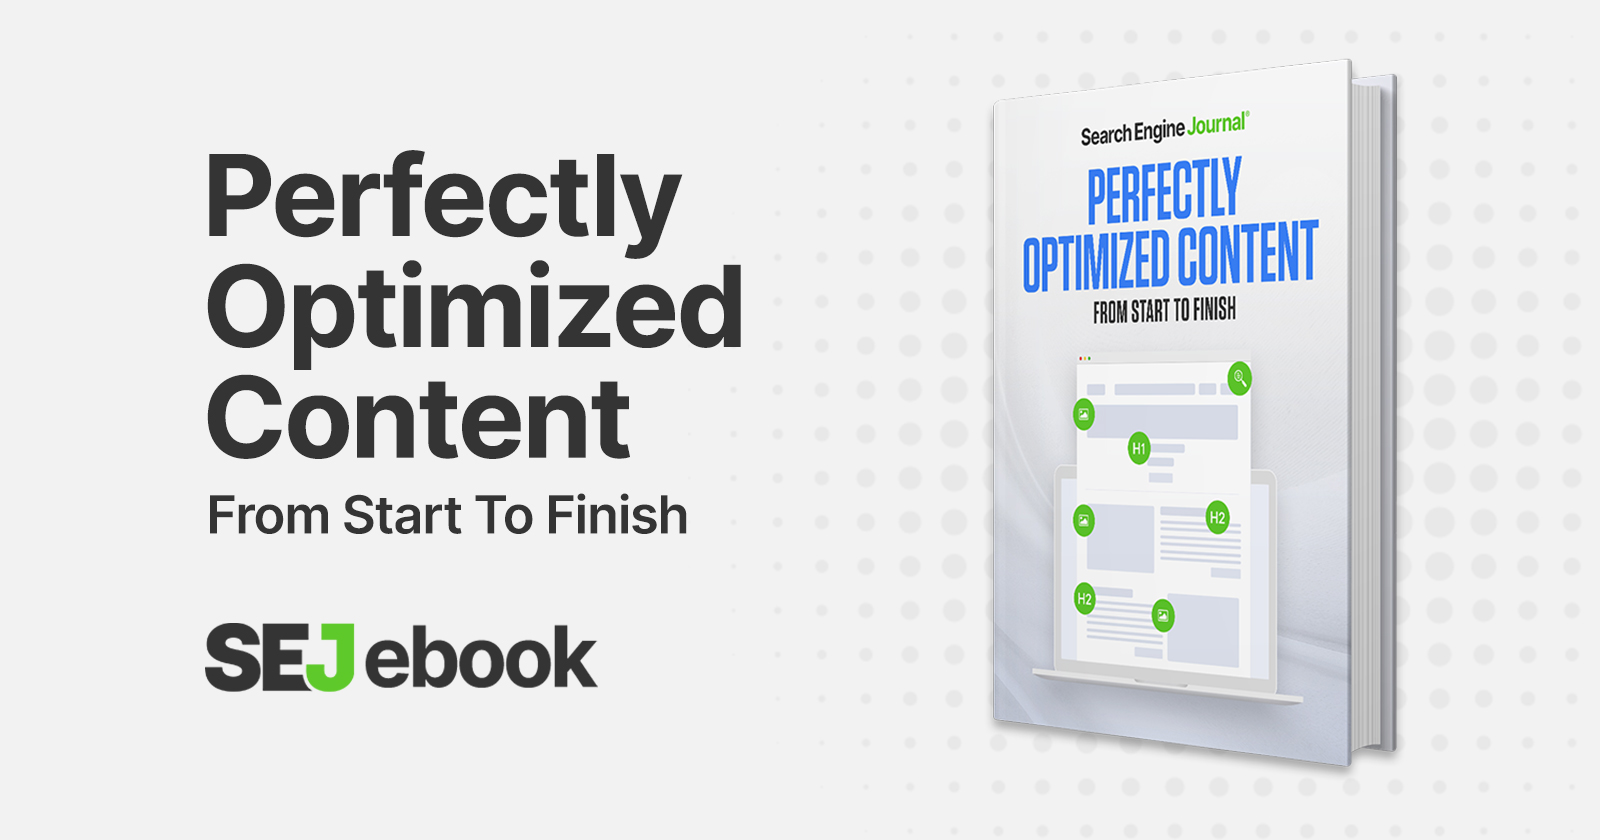 Perfectly Optimized Content From Start to Finish [Ebook] via @sejournal, @duchessjenm